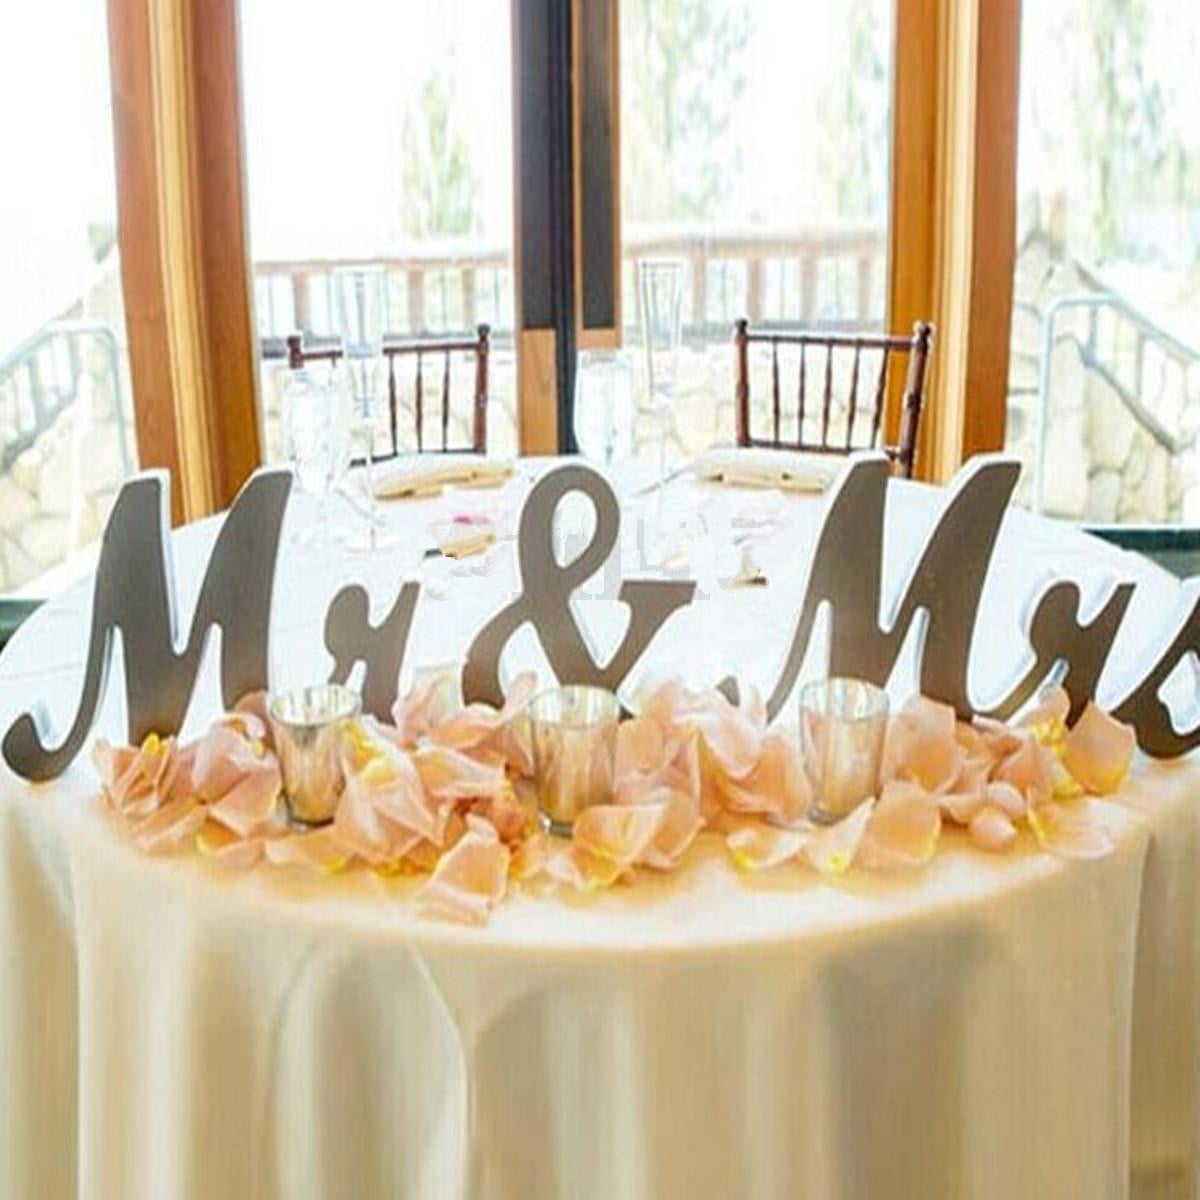 3x Mr & Mrs Wooden Letters Sign Reception Standing Top Table Wedding 